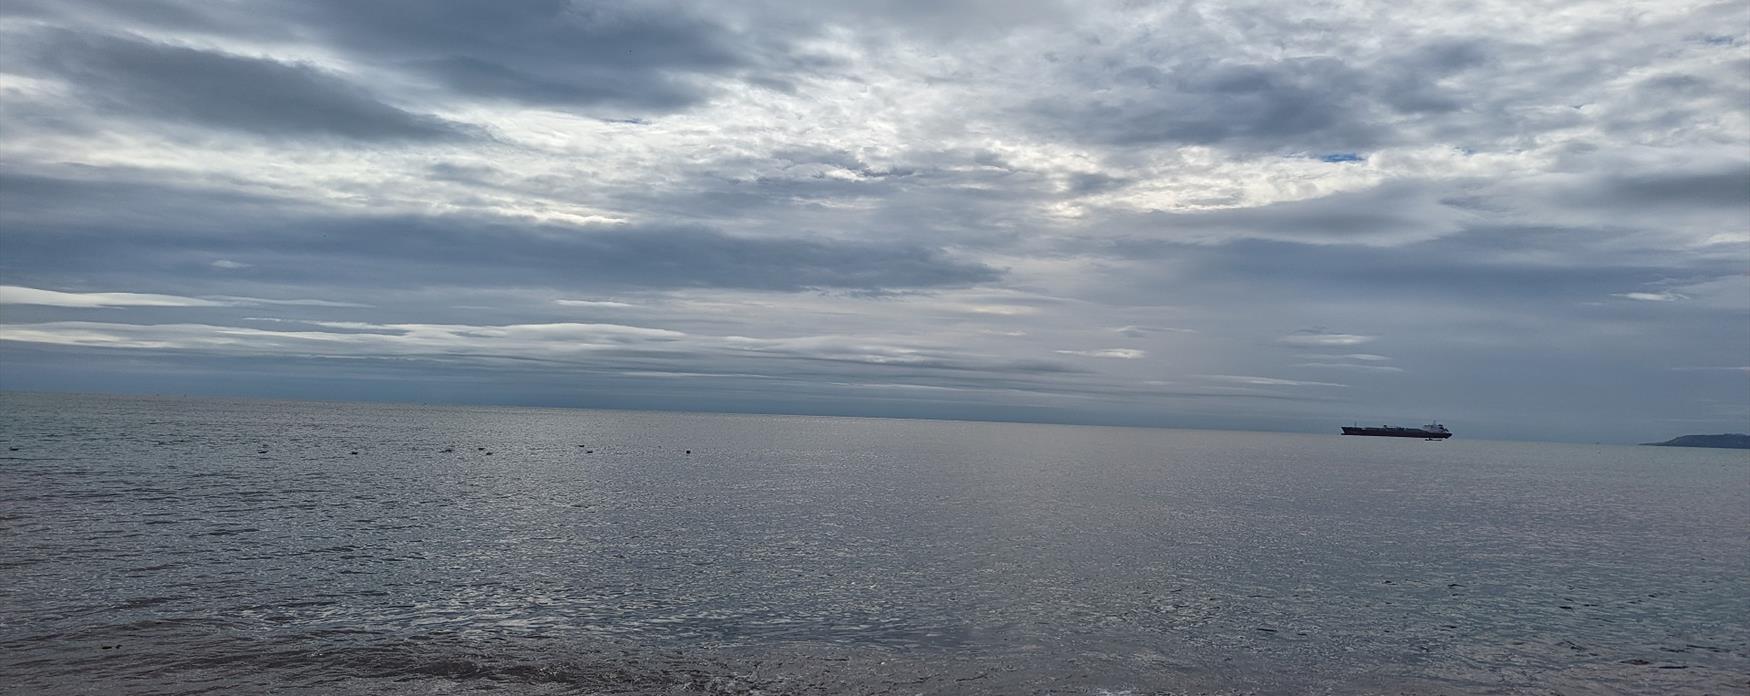 A view of the sea from the foreshore. The sky above has clouds which appear stormy.